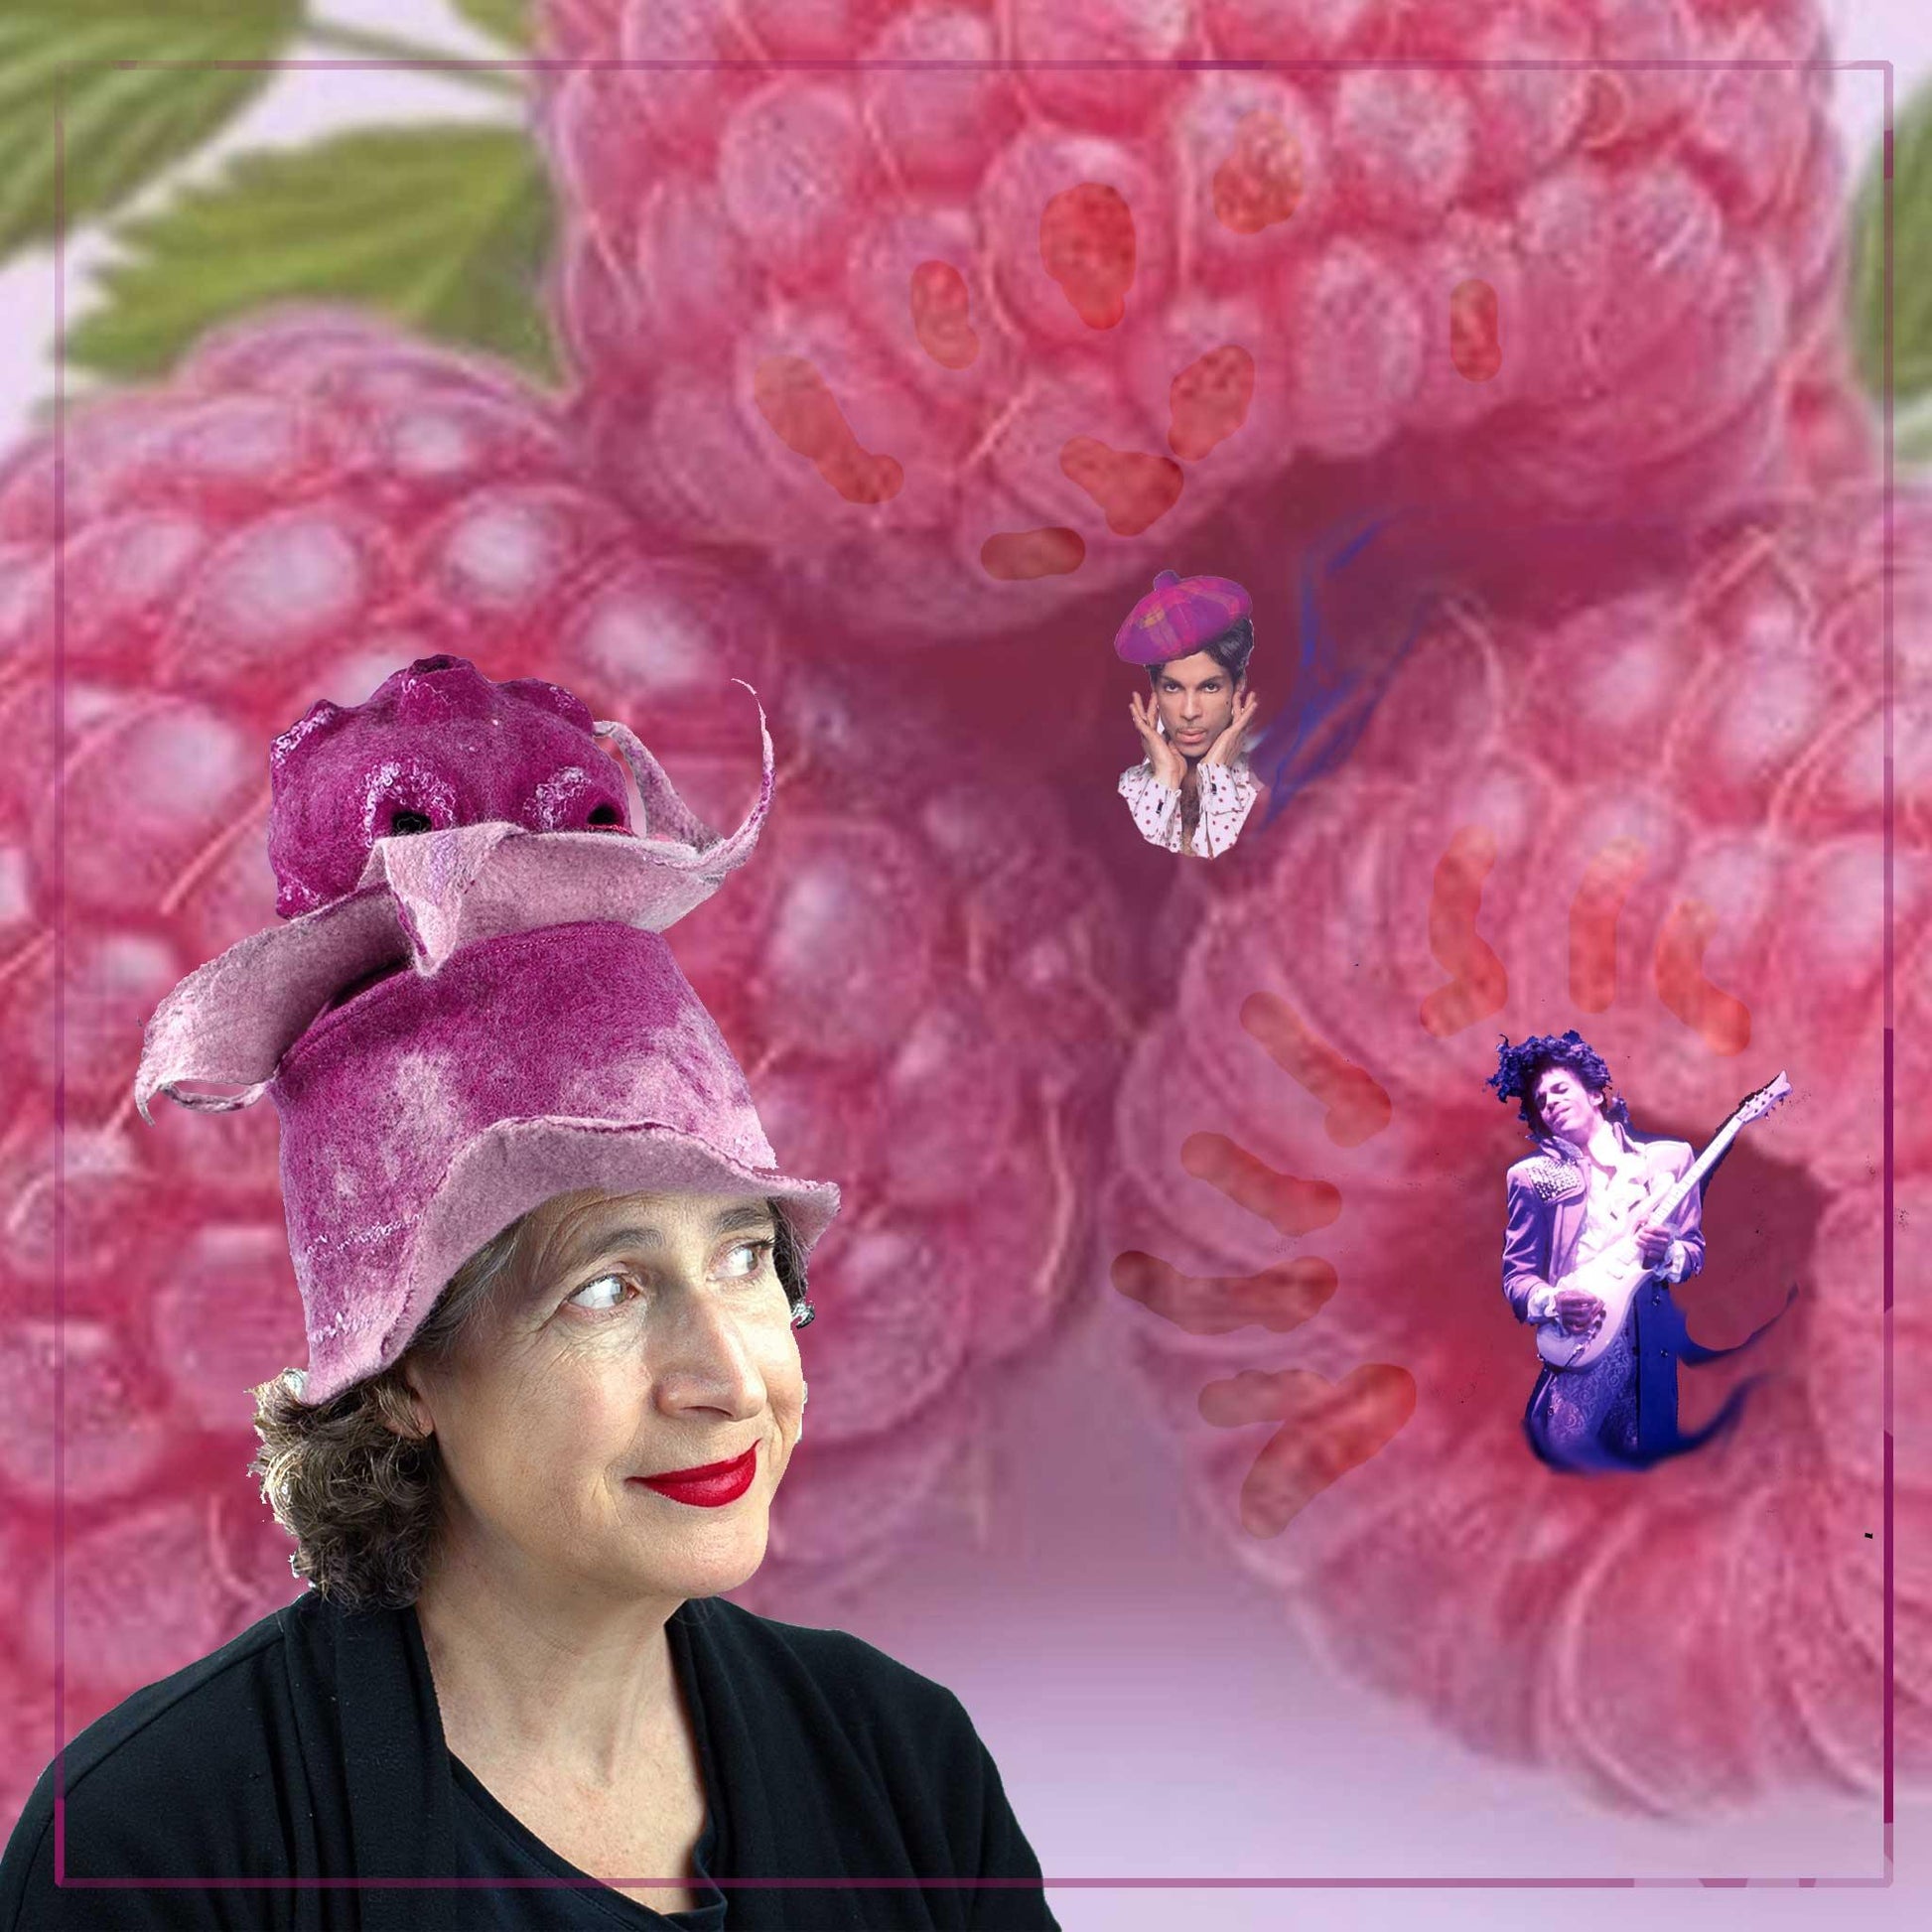 Prince Inspired Collage with the Raspberry Bandleader Hat.